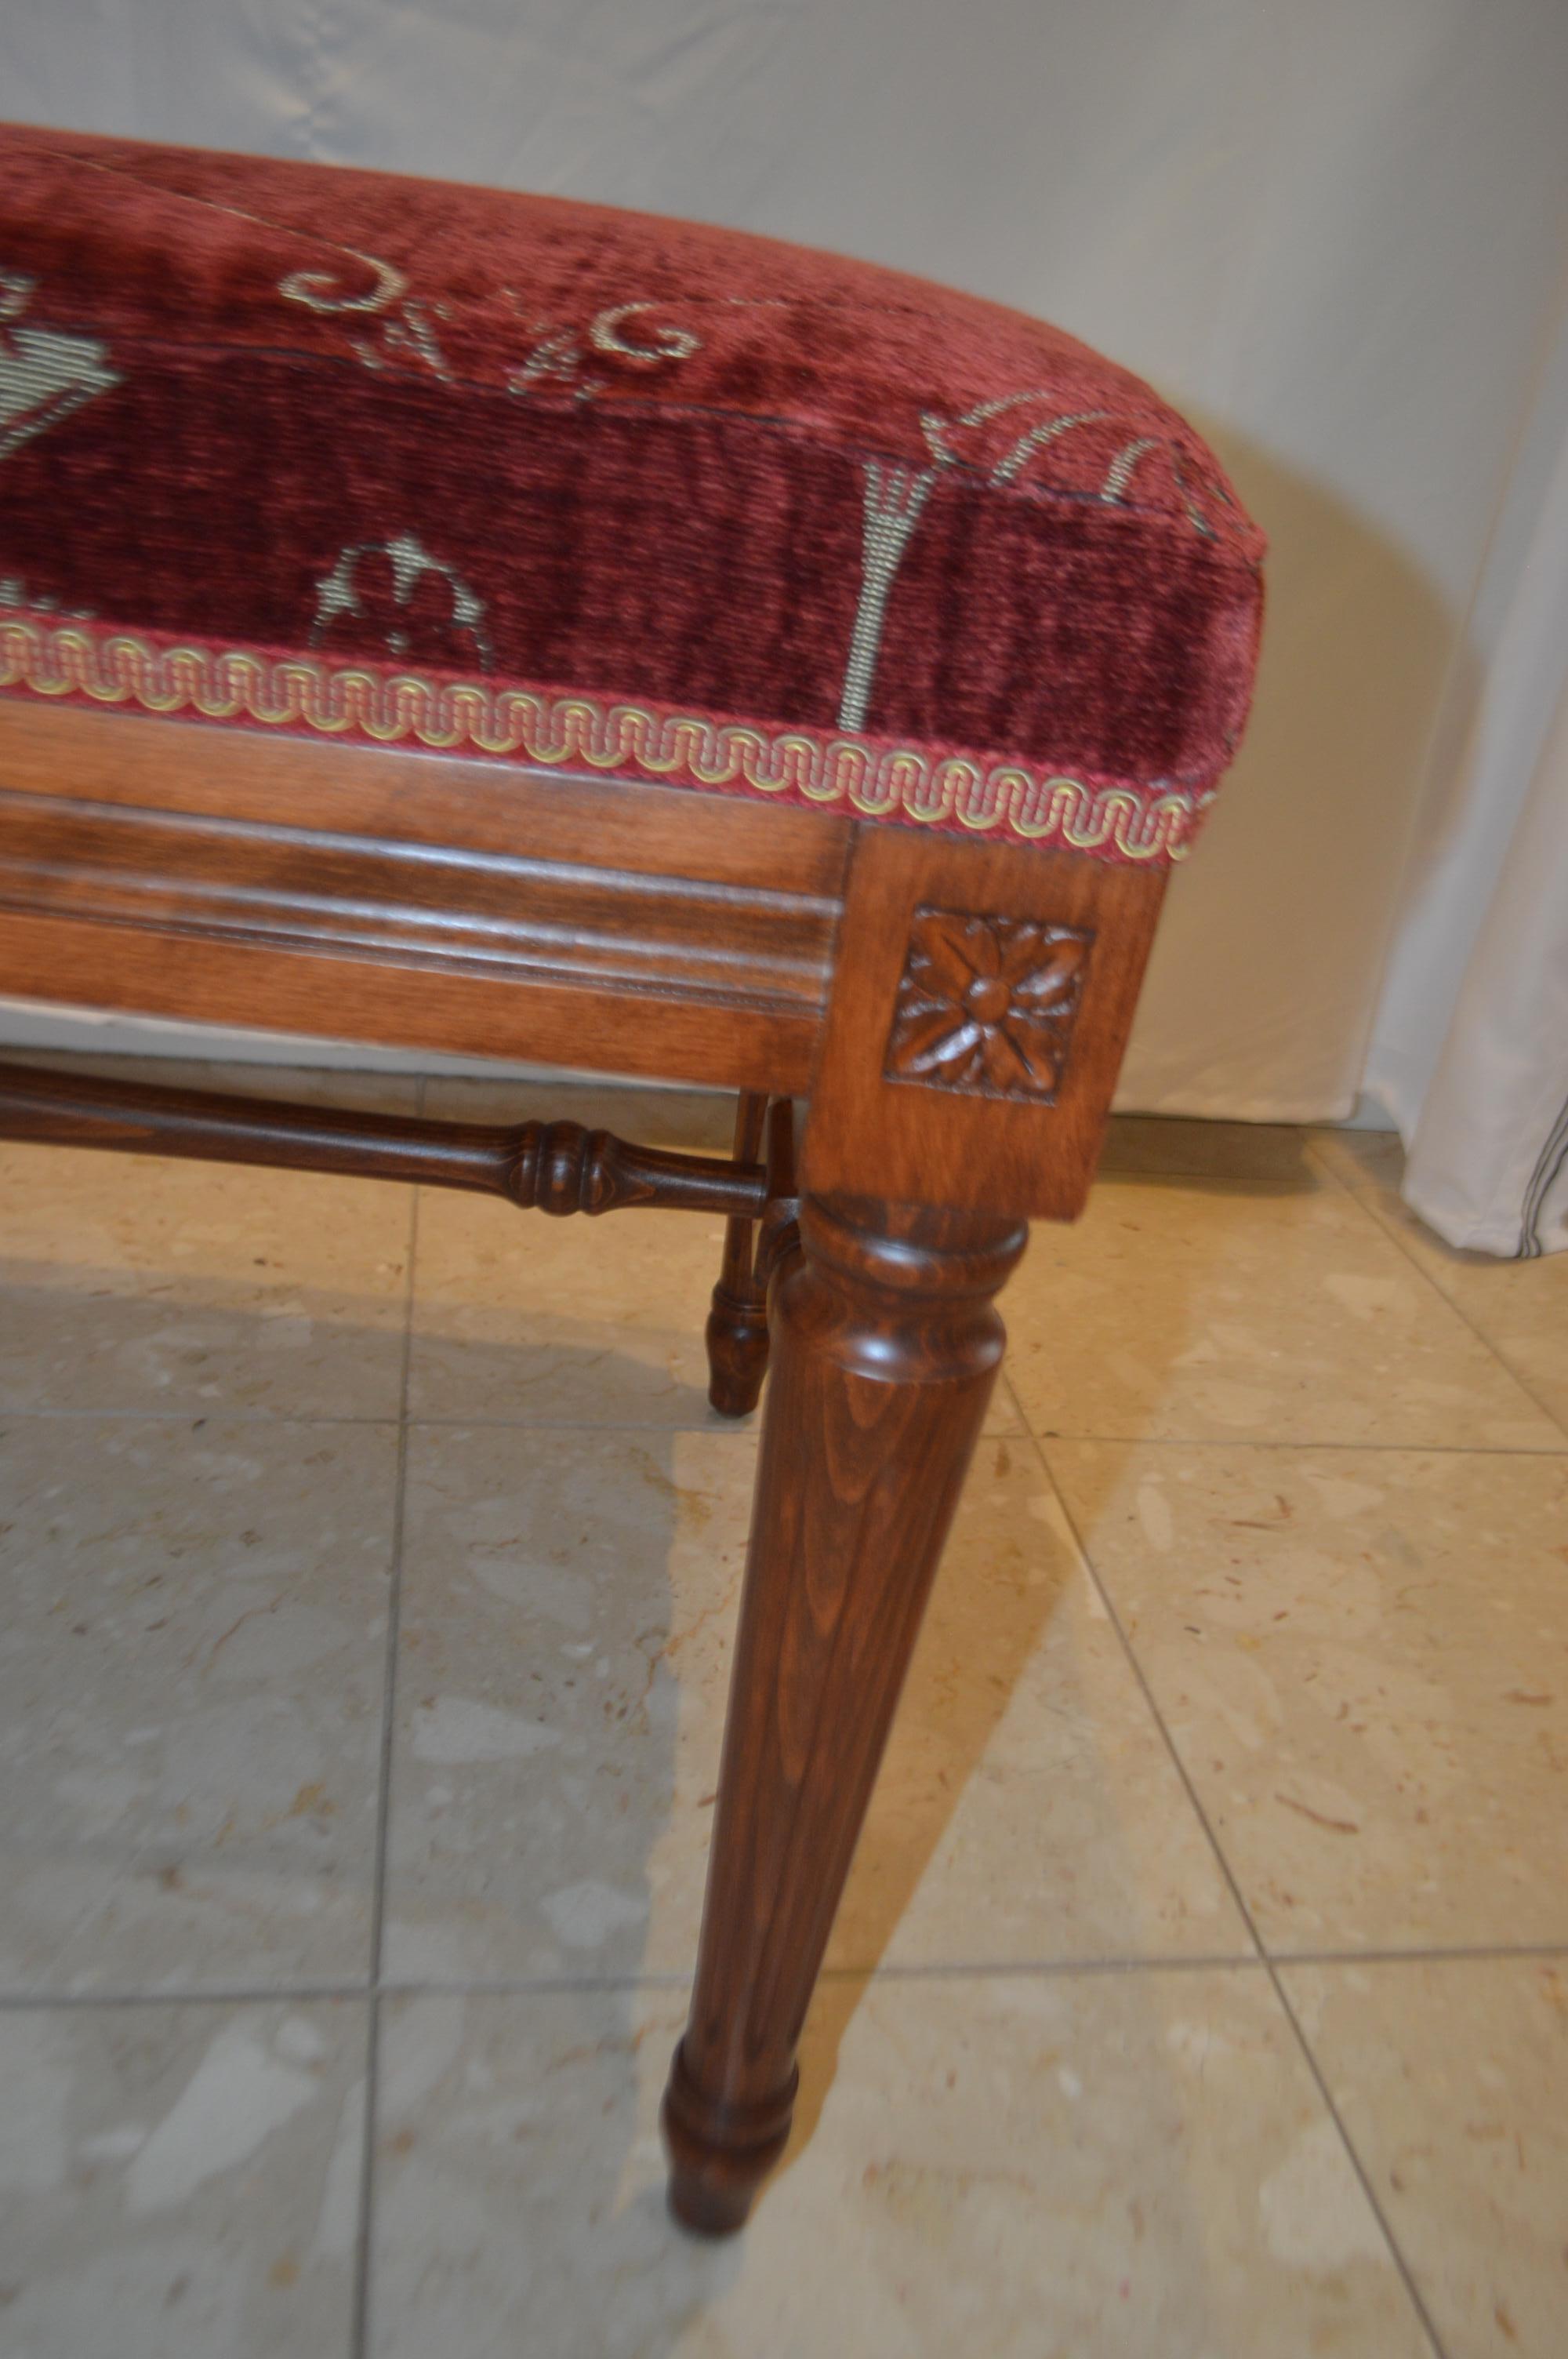 Louis XVI style bench made in Italy of beechwood and it has been stained in a walnut tone. The bench is made of fine quality having a center cross for stability and sturdiness. It has been upholstered in a rich red tone of a fine antique chenille